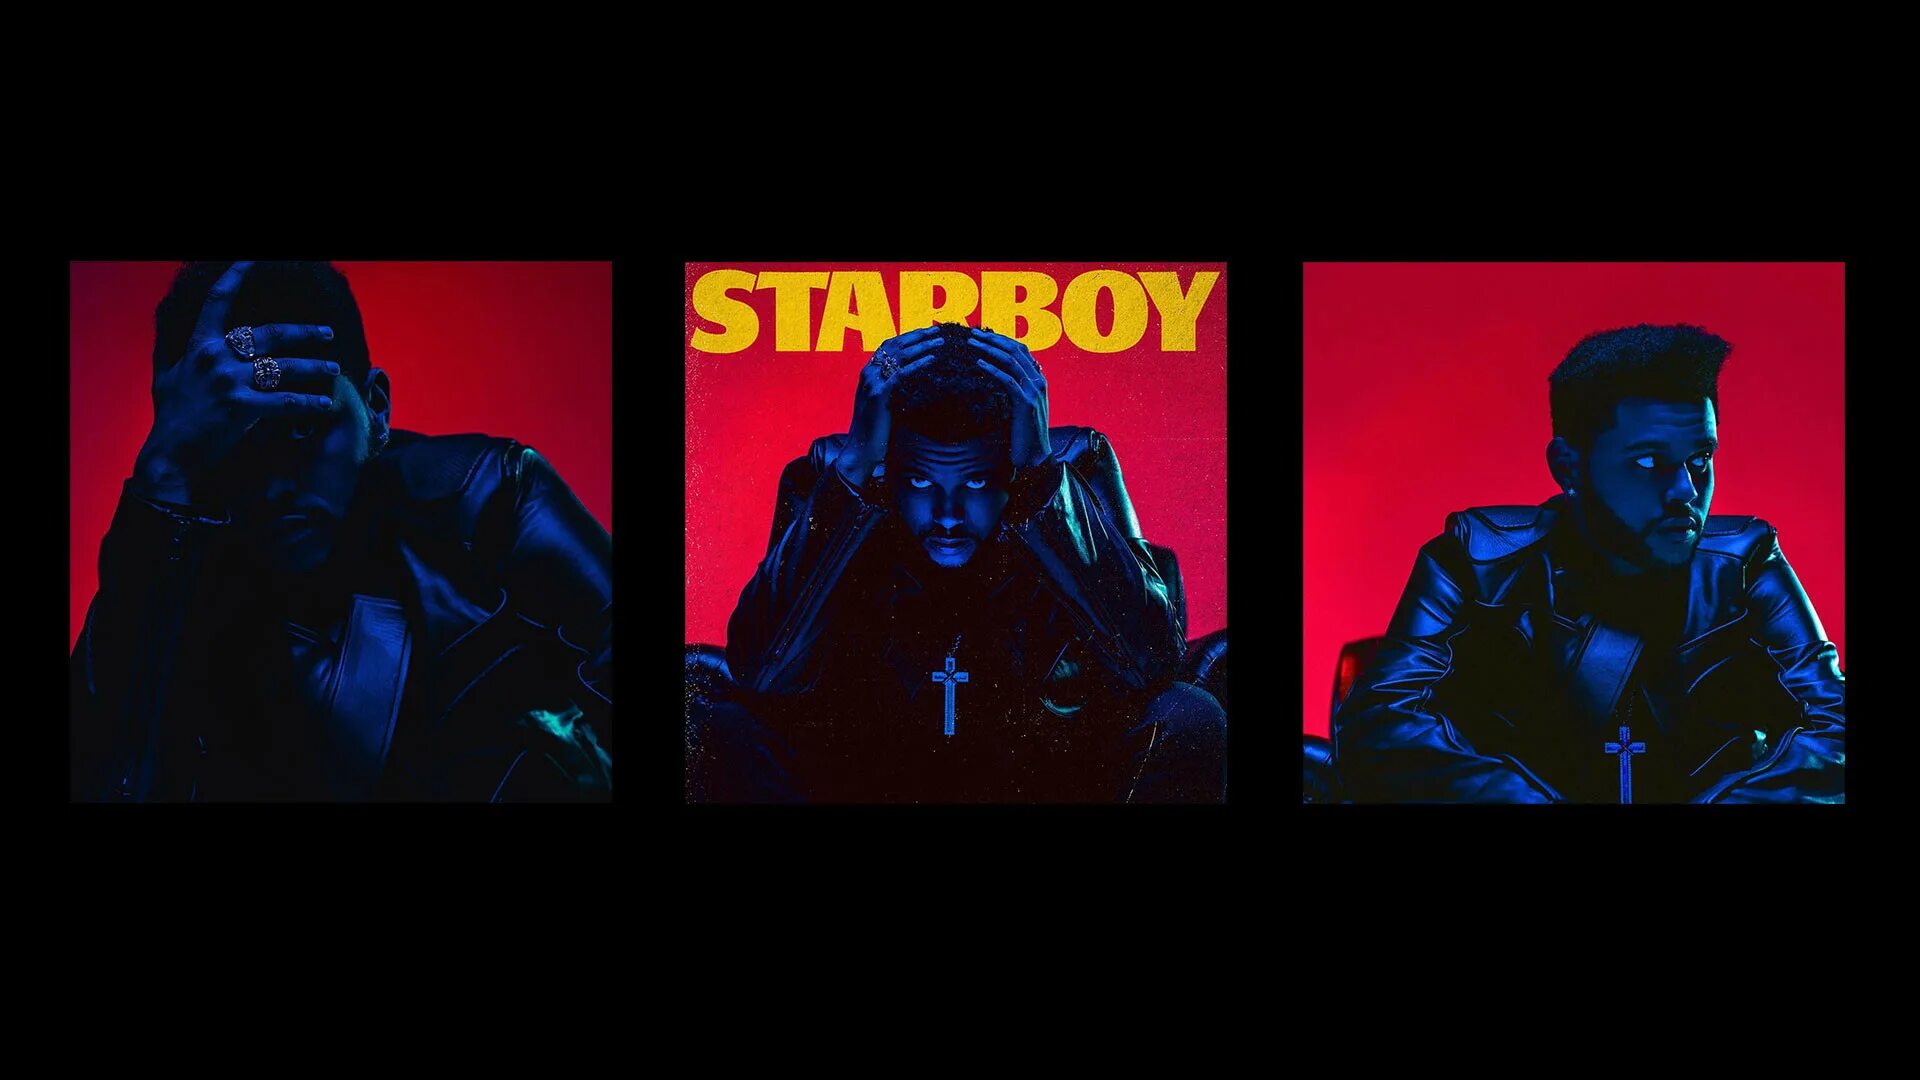 The weekend feat. The Weeknd 2022. The Weeknd Starboy album Cover. Starboy the Weeknd обложка. The Weeknd Эстетика.